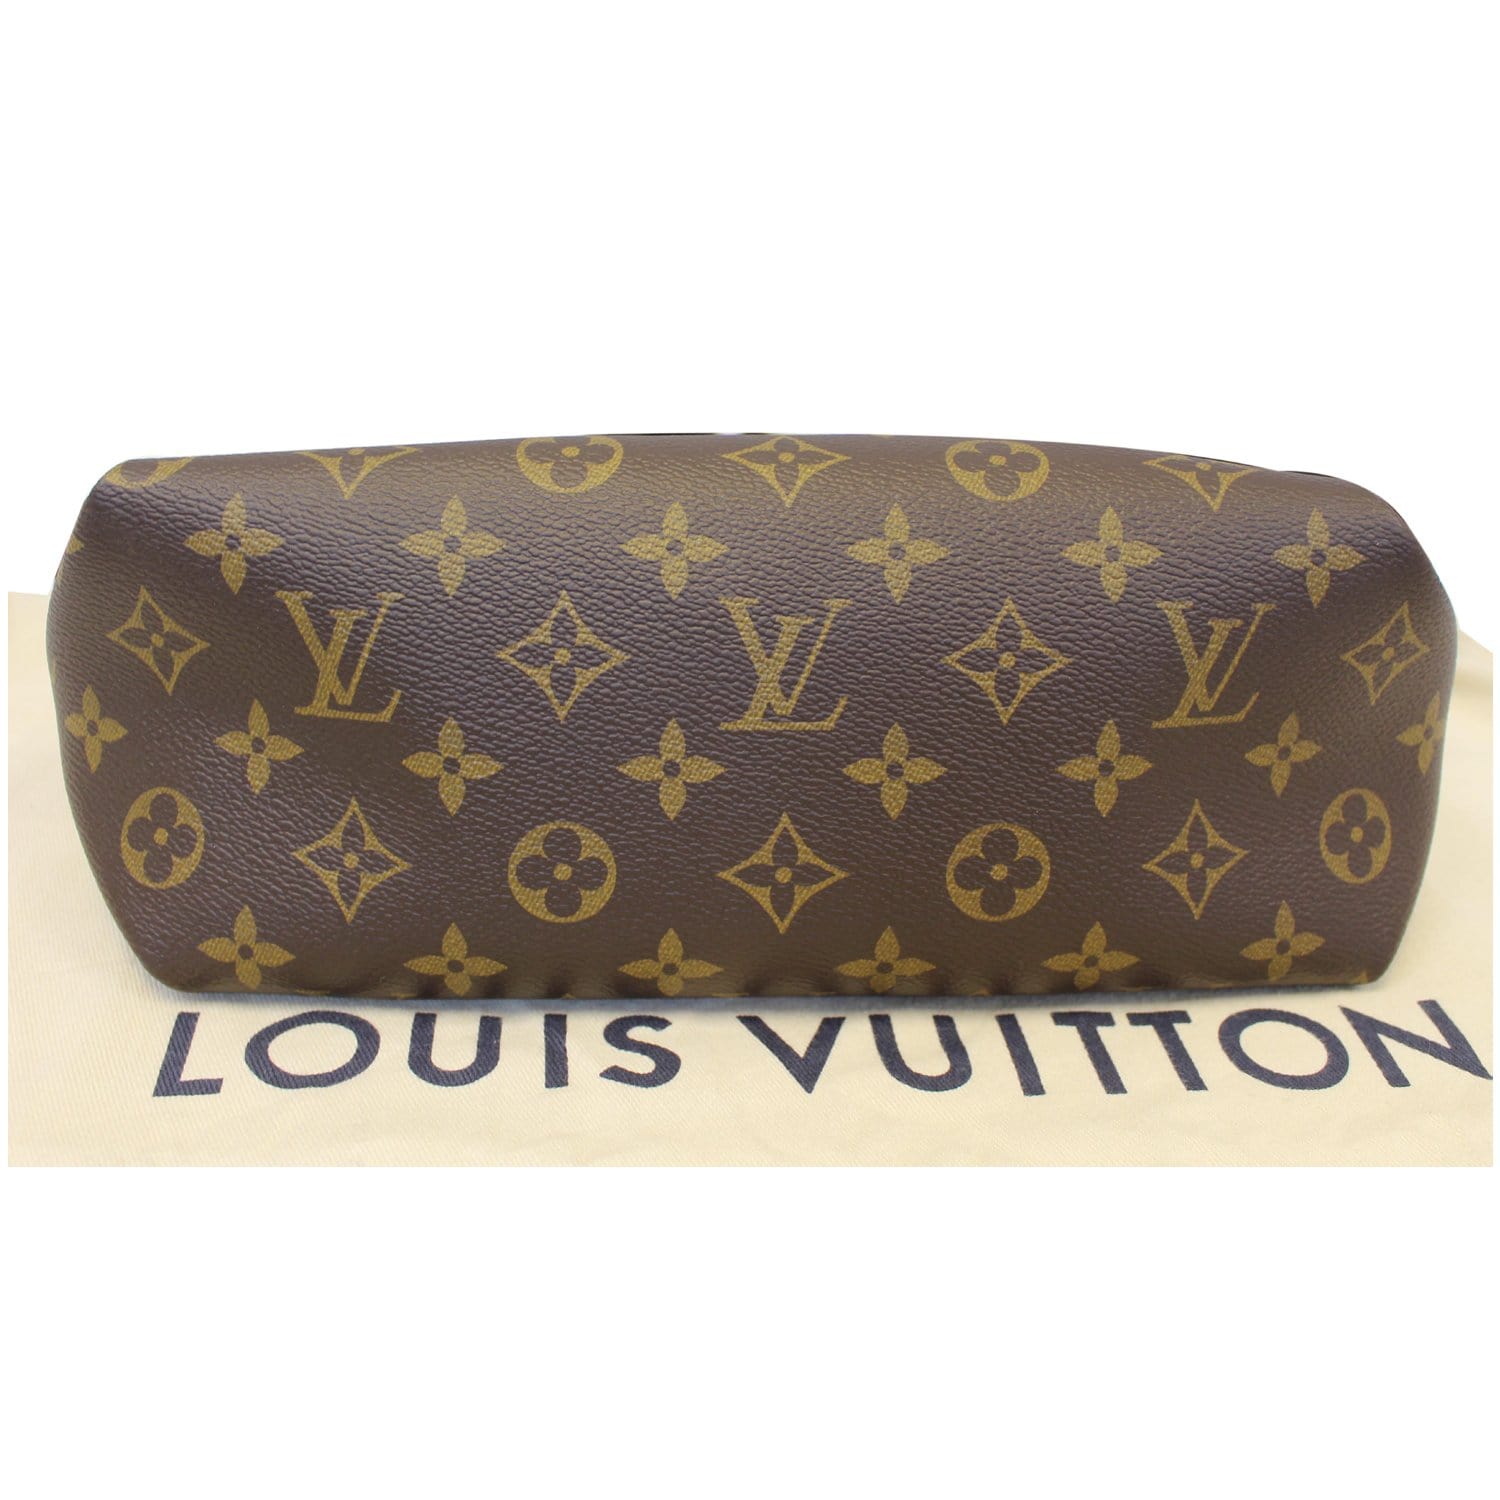 Only 678.00 usd for LOUIS VUITTON Flower Zipped MM Monogram Canvas